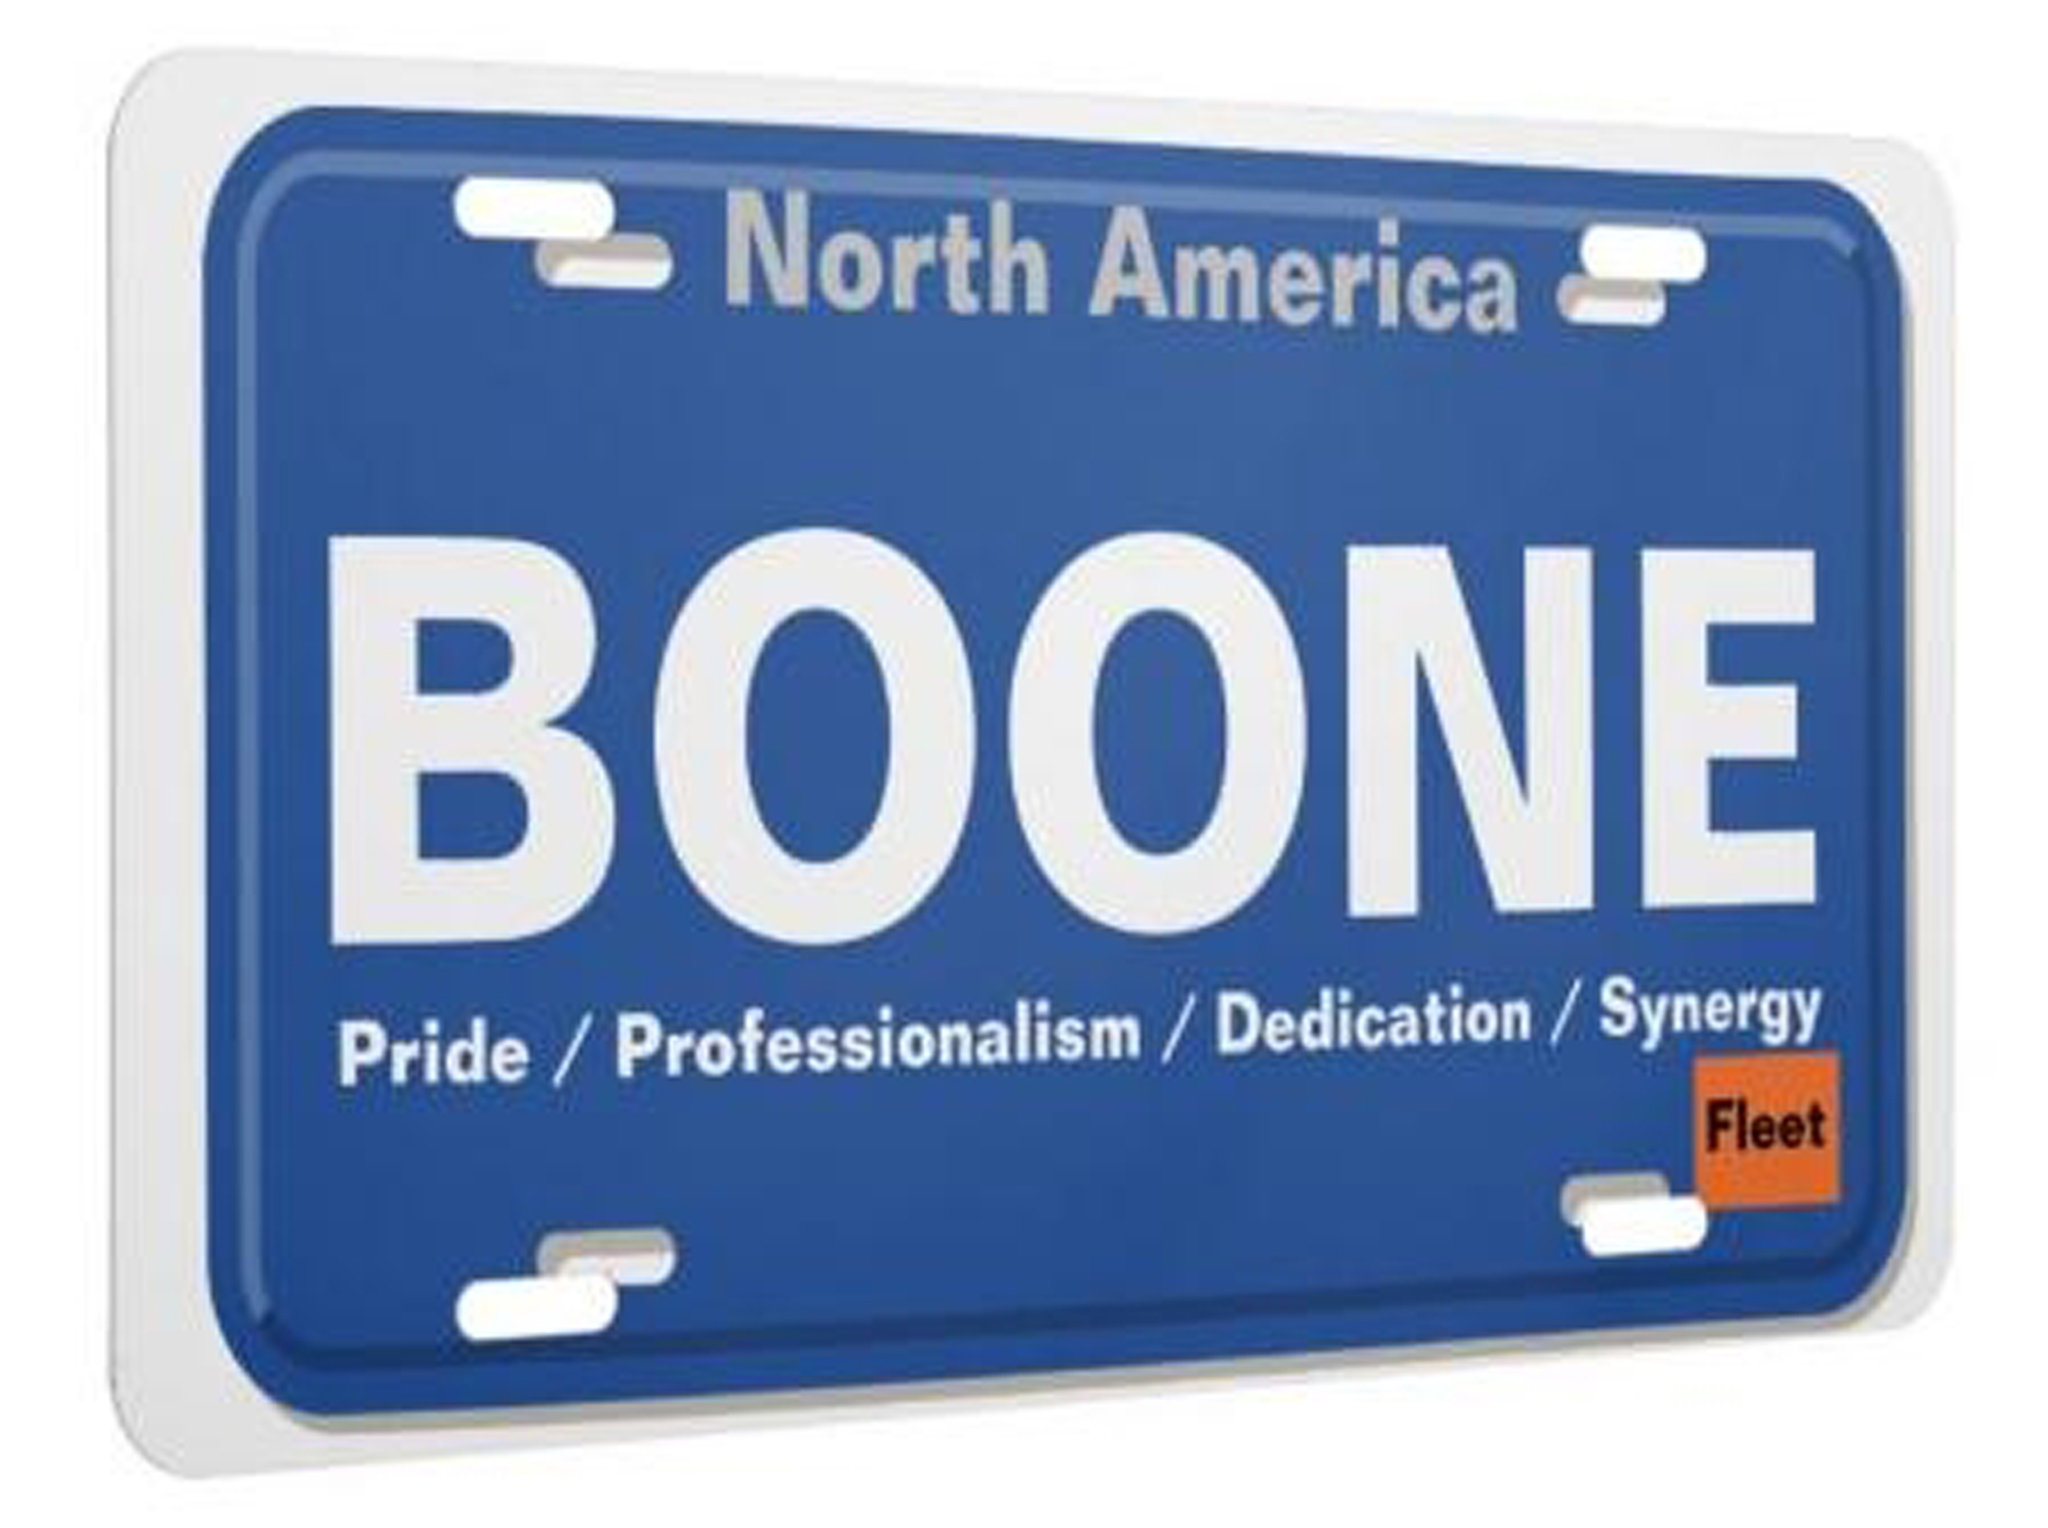 Boone Motor Freight Plate